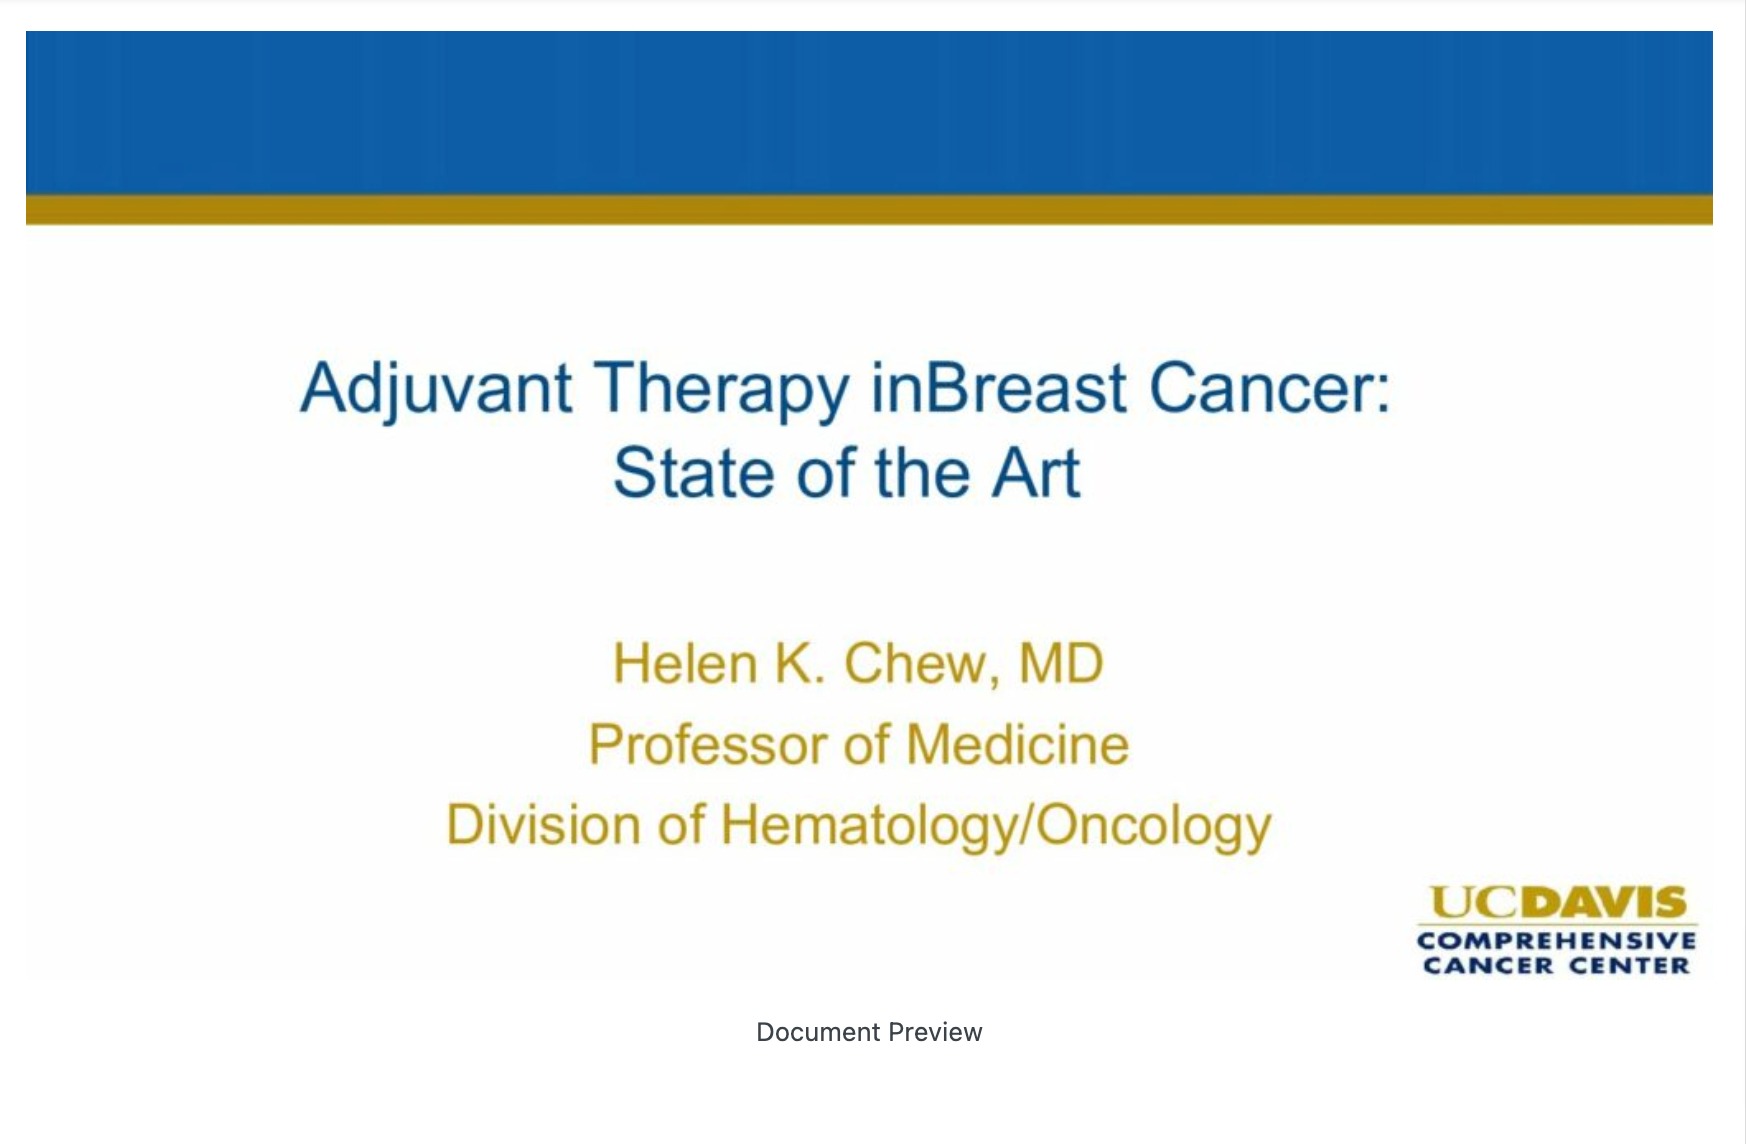 Adjuvant Therapy in Breast Cancer: State of the Art